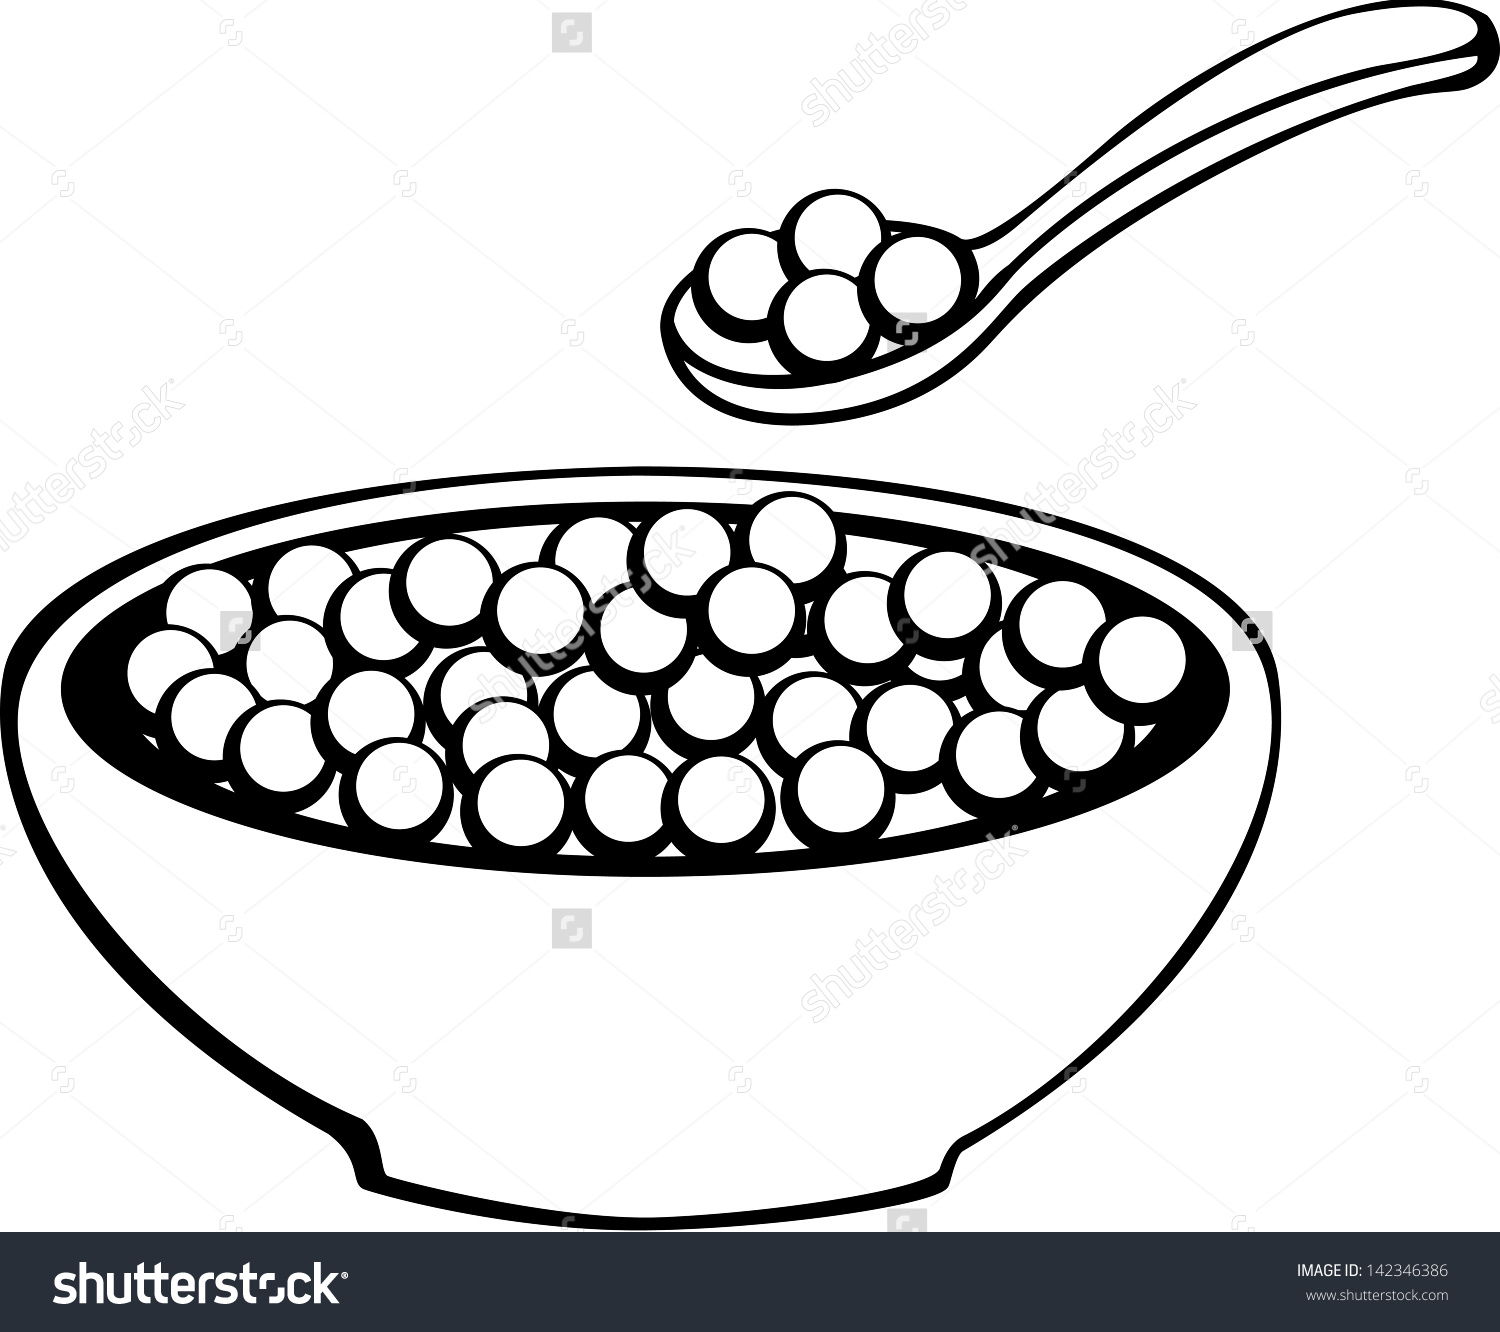 cereal in bowl and spoon - Cereal Bowl Clipart